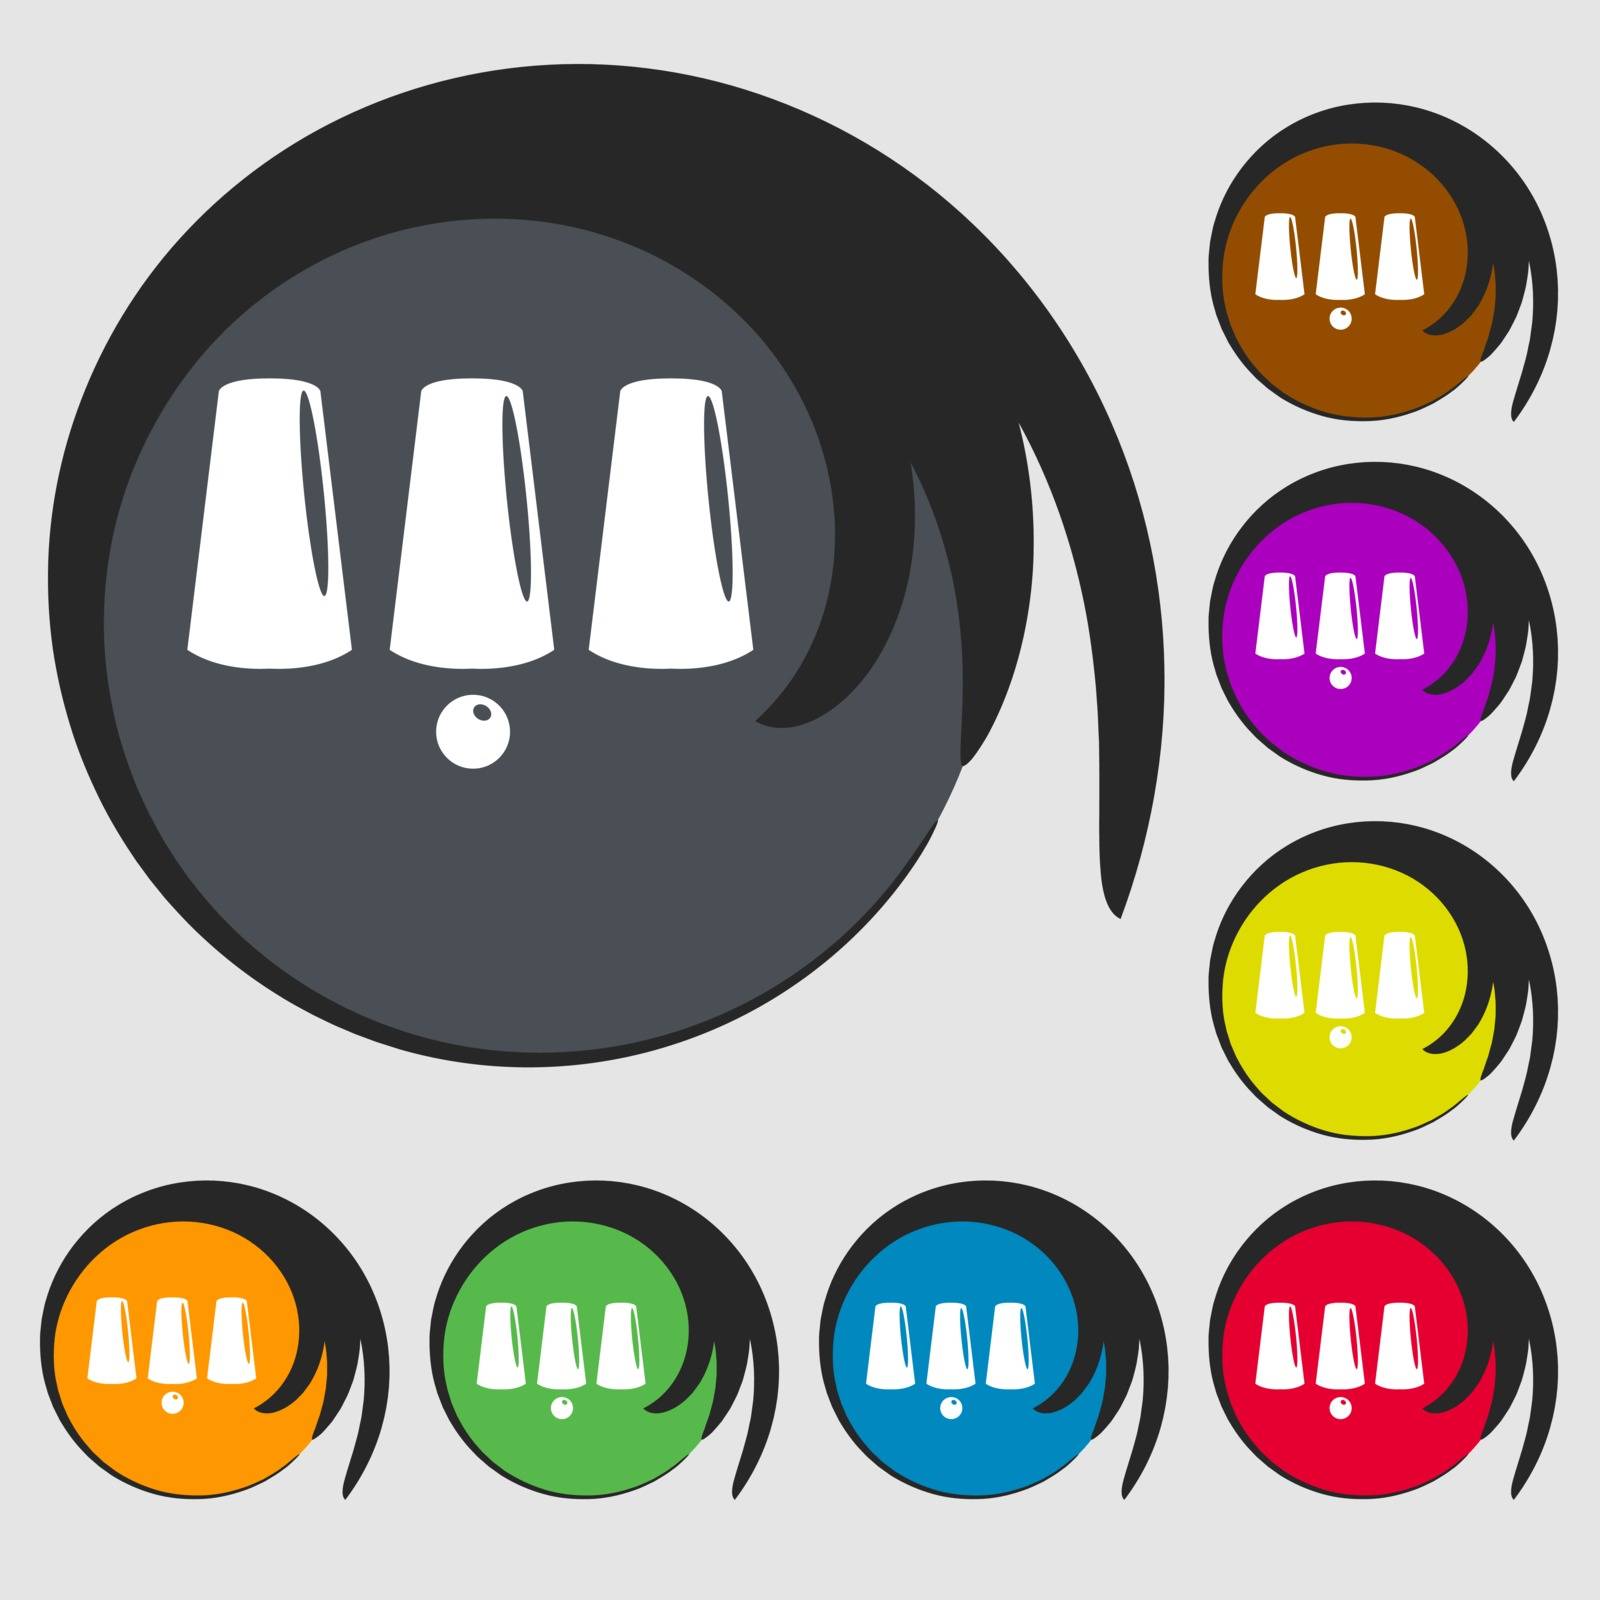 Three game thimbles with a ball, games 3 cups icon. Symbols on eight colored buttons. Vector illustration